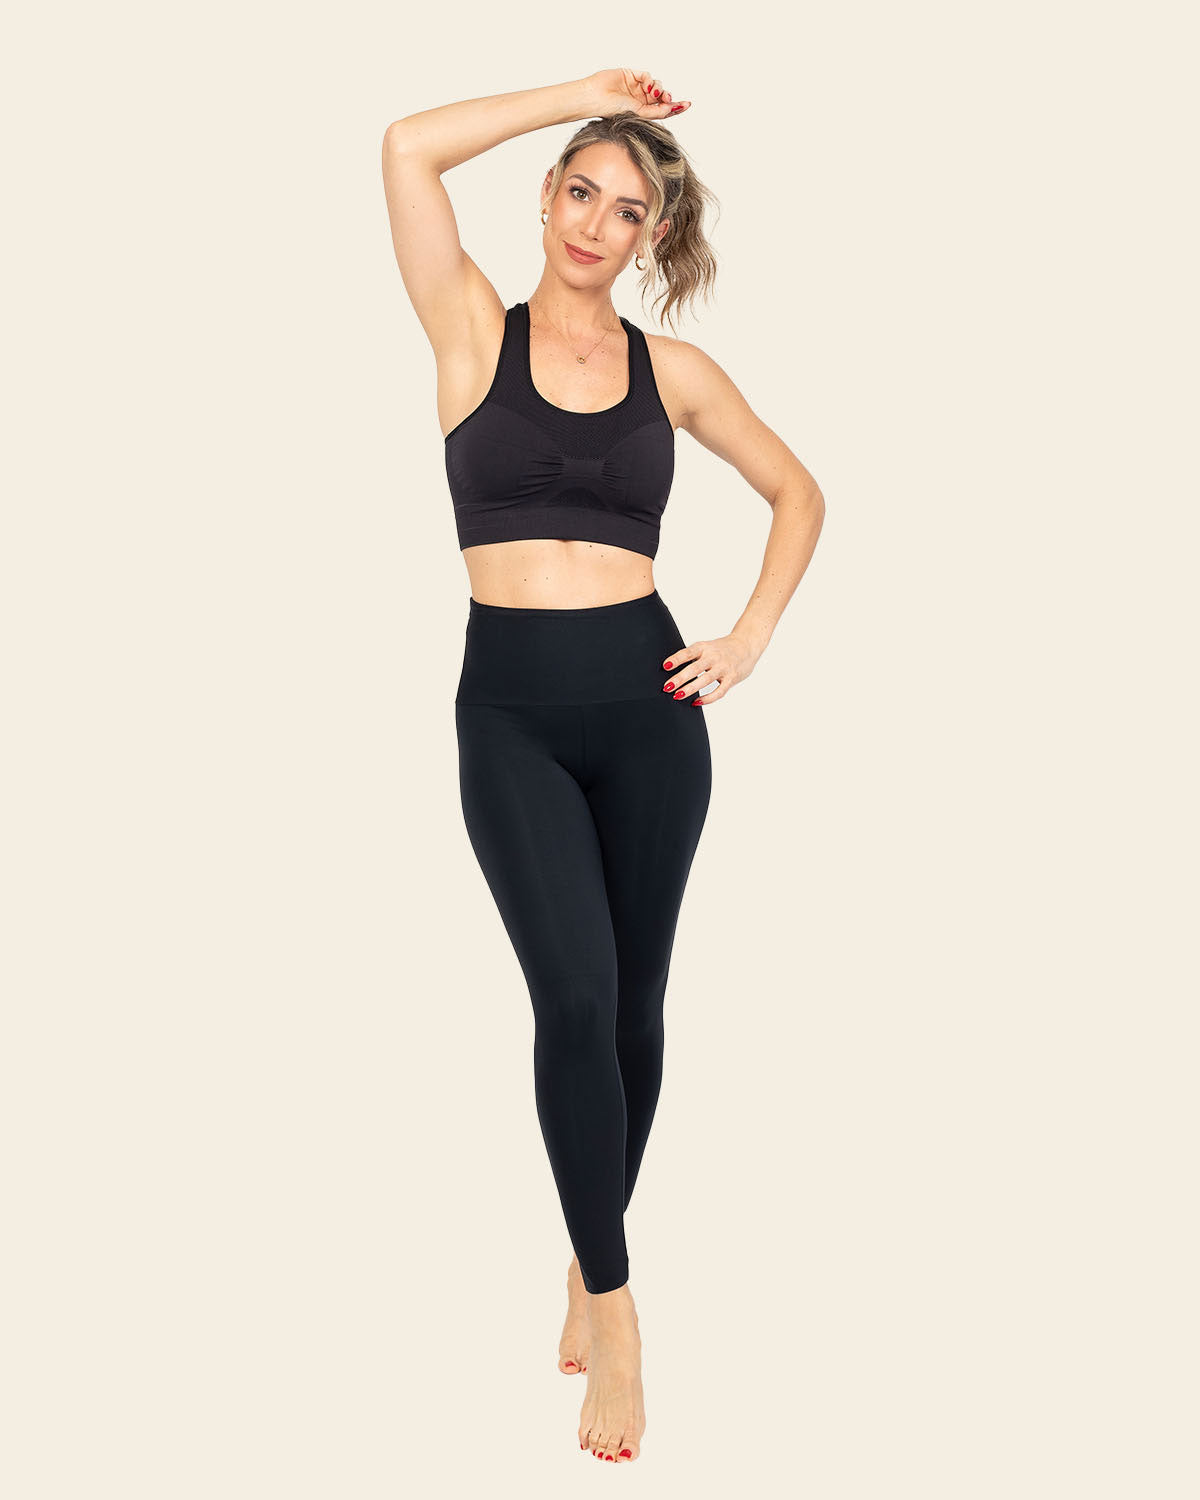 Save 30% On These Spanx Leggings, Sports Bras, Jeans, Bodysuits & More